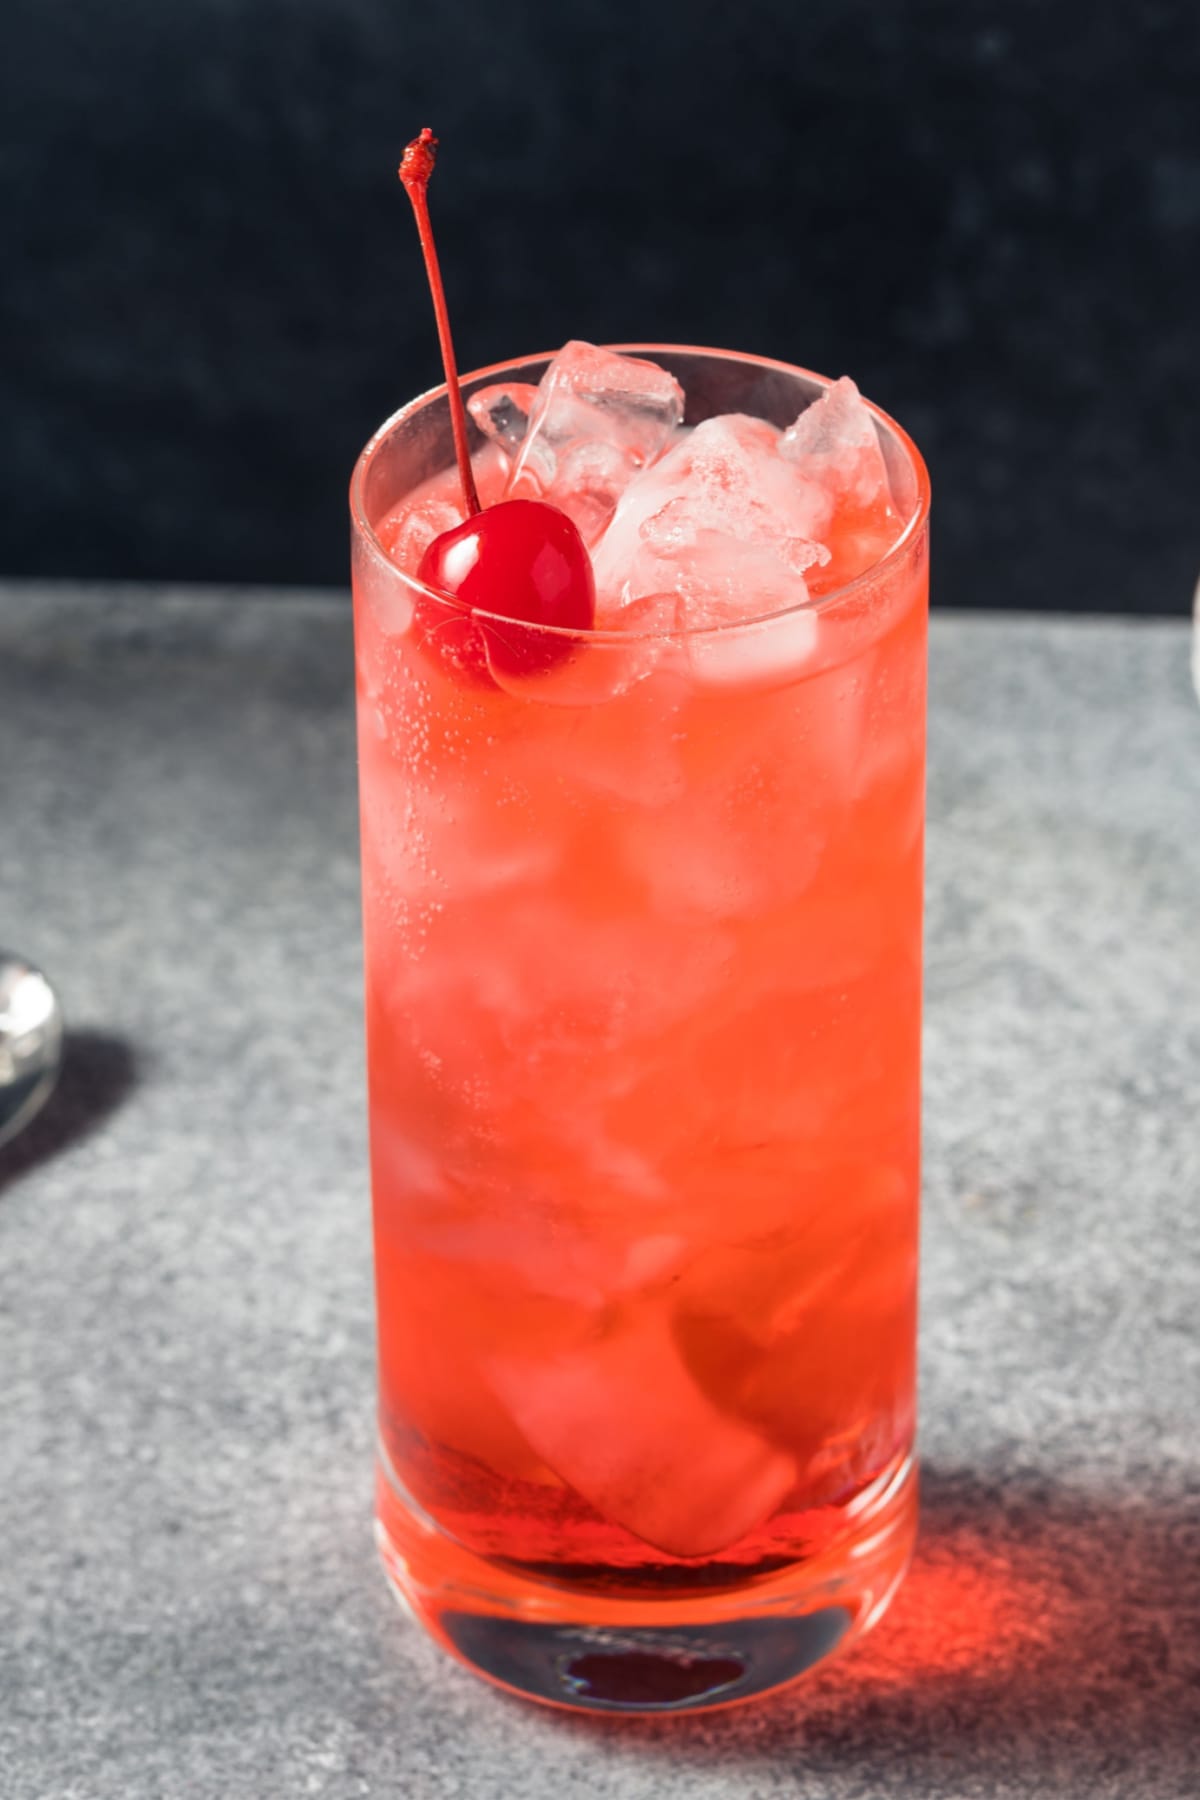 Ice cold Shirley Temple cocktail garnished with fresh cherry.